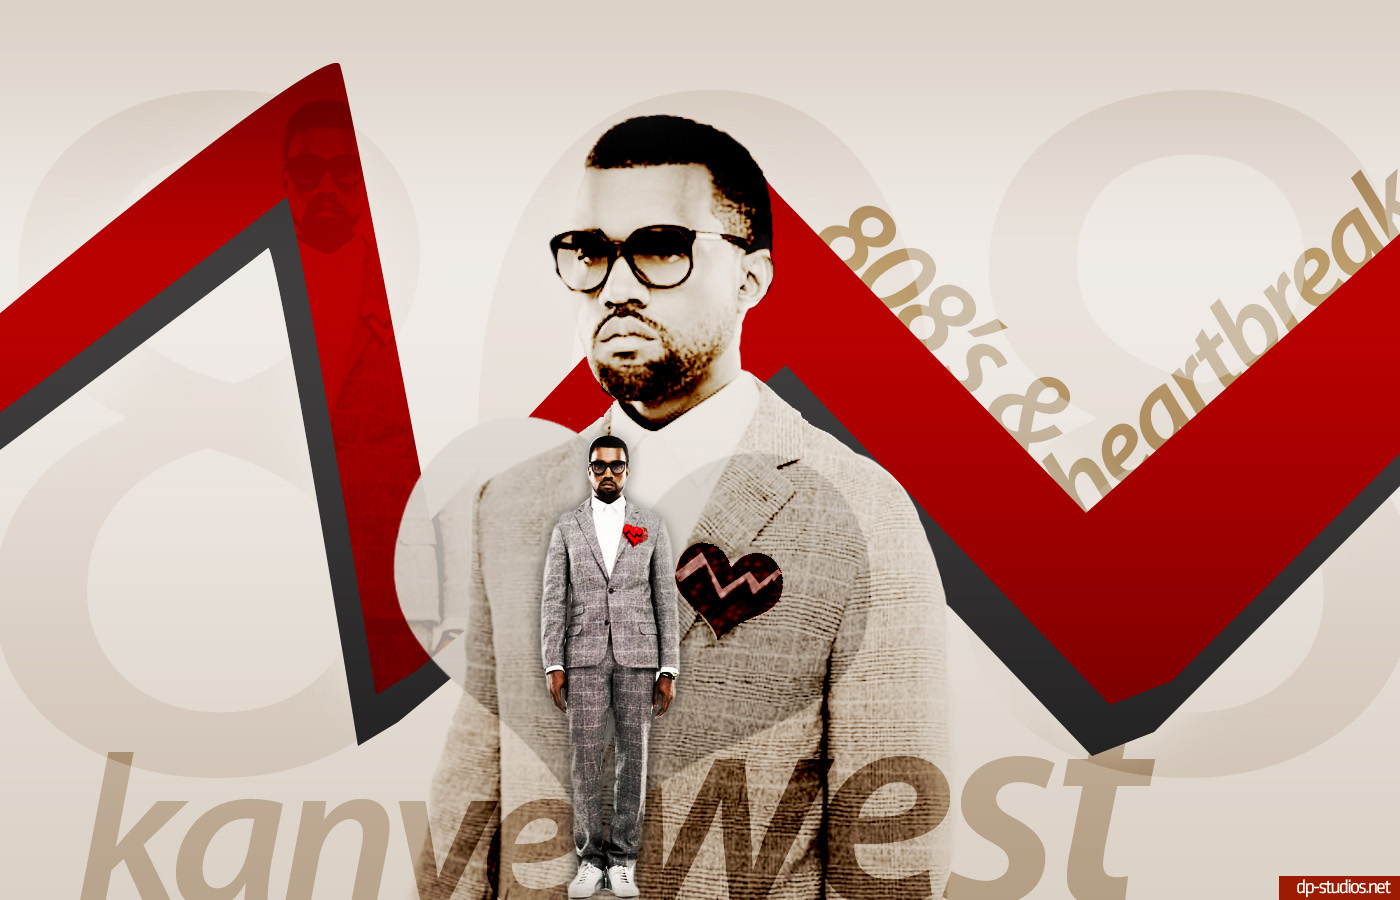 Free download Kanye West 808s And Heartbreak 808s kanye west by dp16 [1400x900] for your Desktop, Mobile & Tablet. Explore 808s and Heartbreak Wallpaper and Heartbreak Wallpaper, Heartbreak